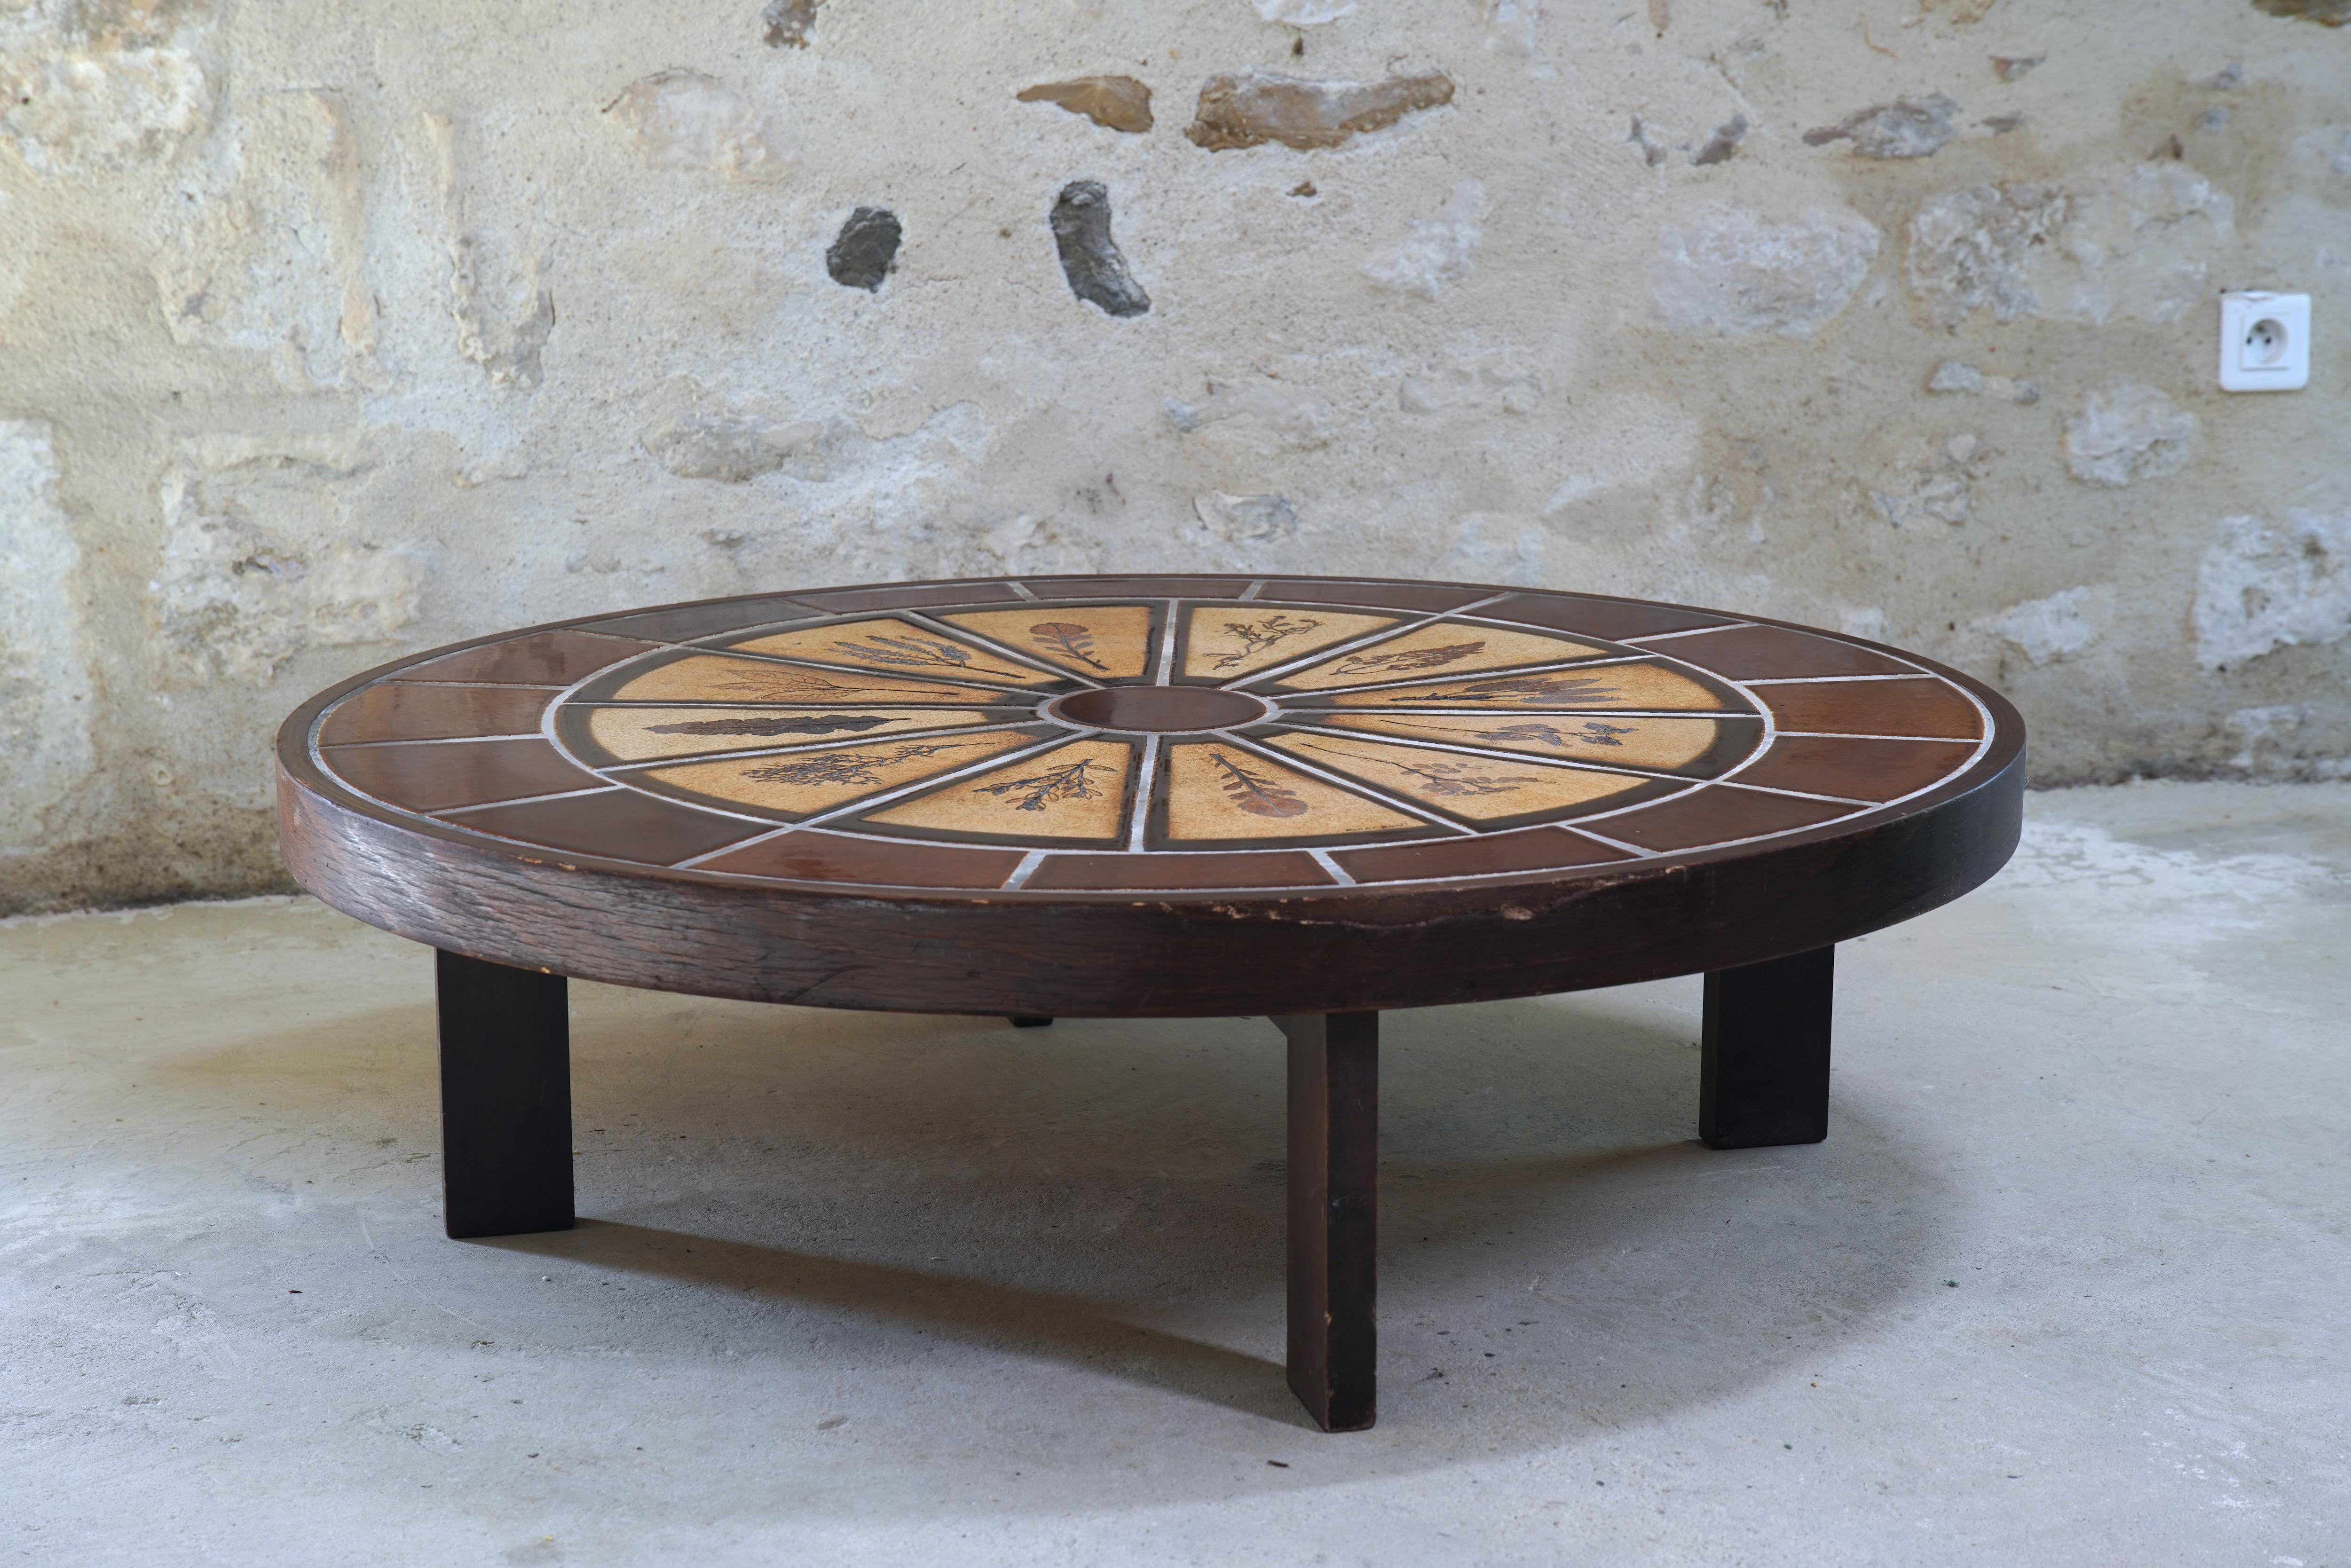 Mid-Century Modern Roger Capron Oval Coffee Table with Garrigue Tiles, France 1960s For Sale